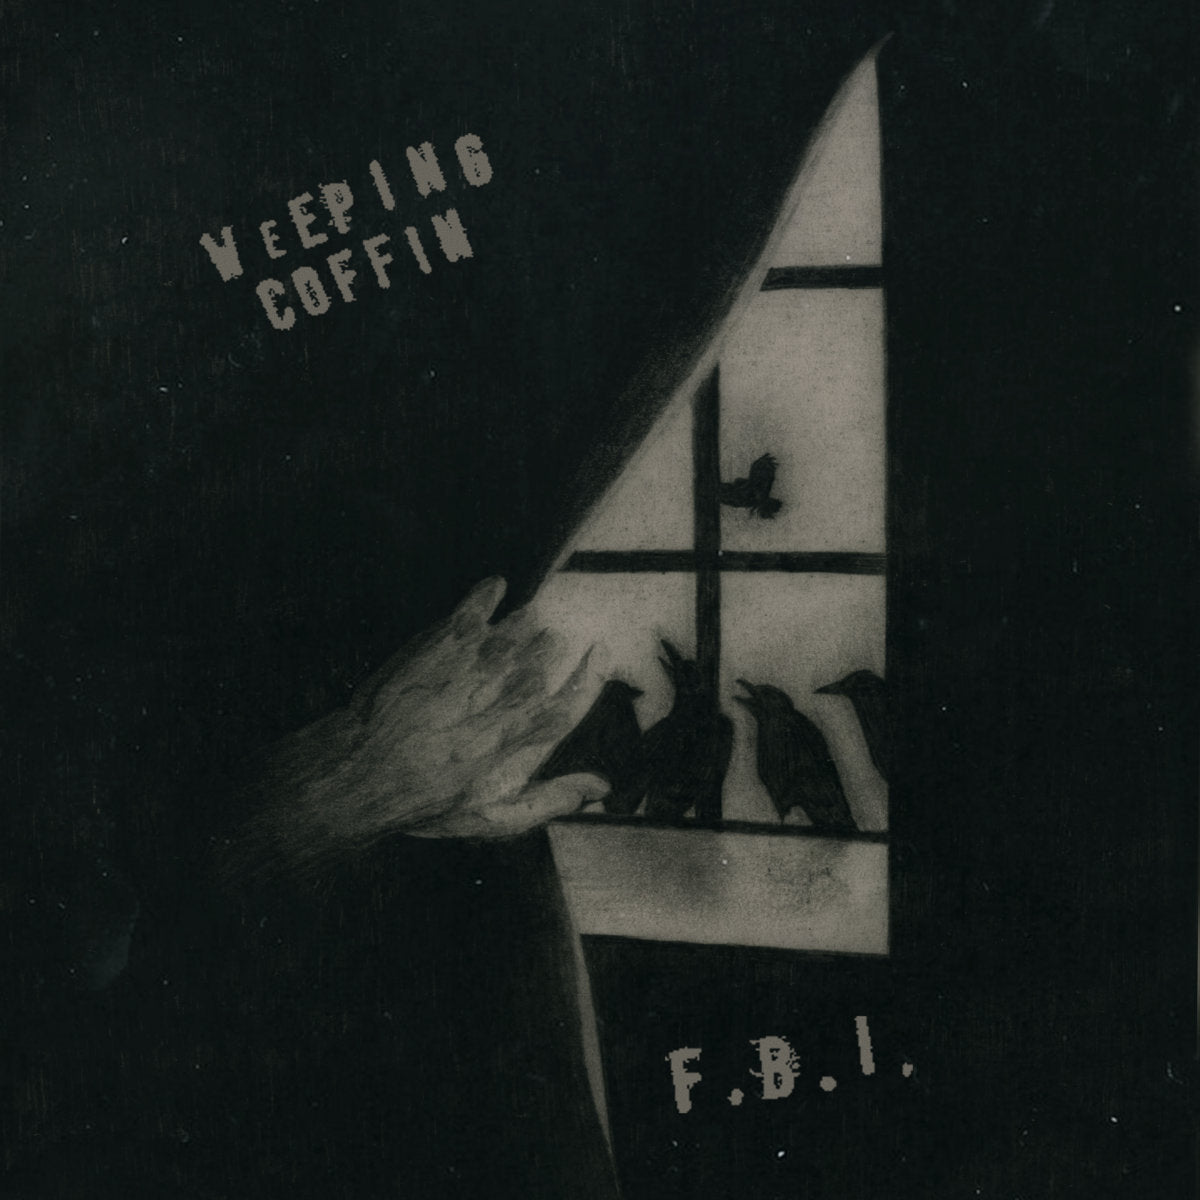 Weeping Coffin - F.B.I 10" EP